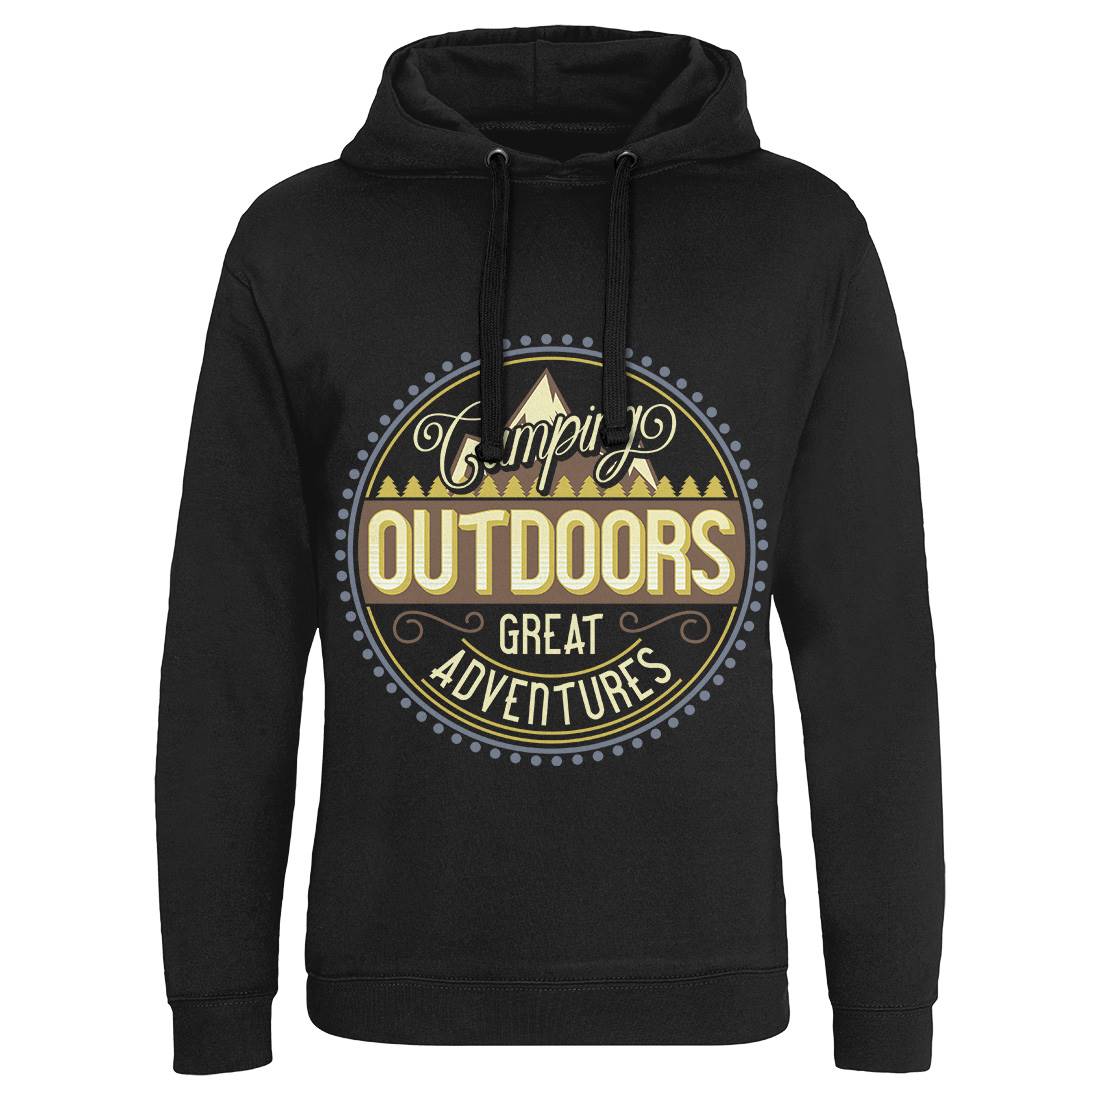 Outdoors Mens Hoodie Without Pocket Nature B326